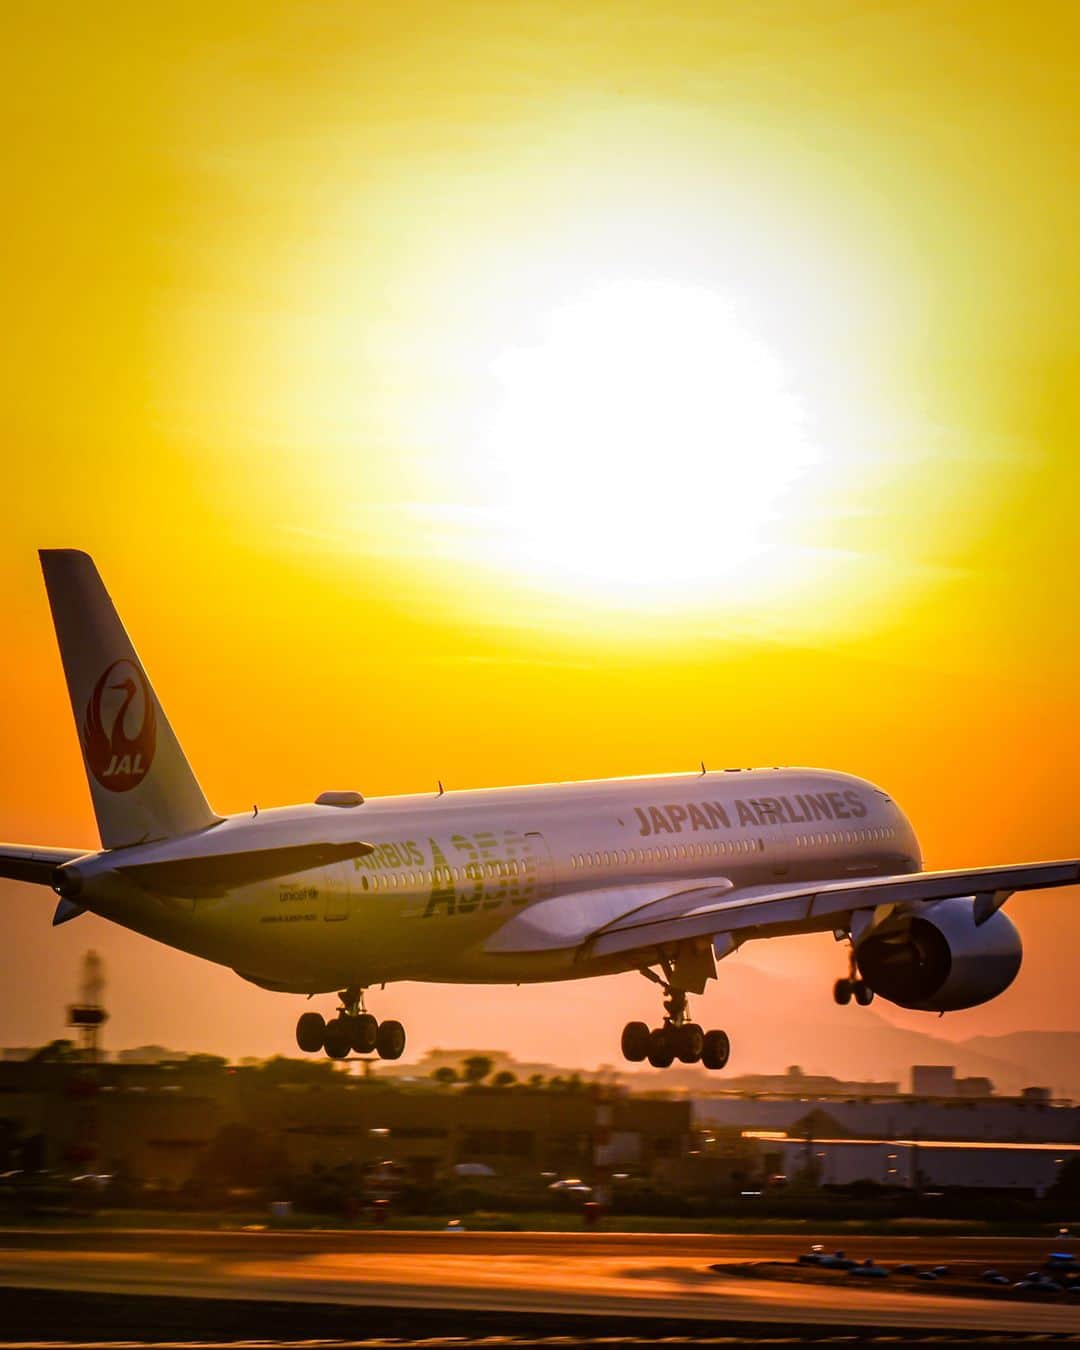 JALのインスタグラム：「. エアバス #A350 ✈️ いつもより凛々しい後ろ姿…✨ #FreshAirJuly . . Photo by @kous_film Post your memories with #FlyJAL  #JapanAirlines #JAL #airplane #✈︎ #jal #飛行機 #飛行機写真 #飛行機撮影 #飛行機のある風景 #飛行機のある空 #飛行機好き #夕日 #夕焼けハンター #千里川の土手 #鶴丸 #旅行 #日本航空」